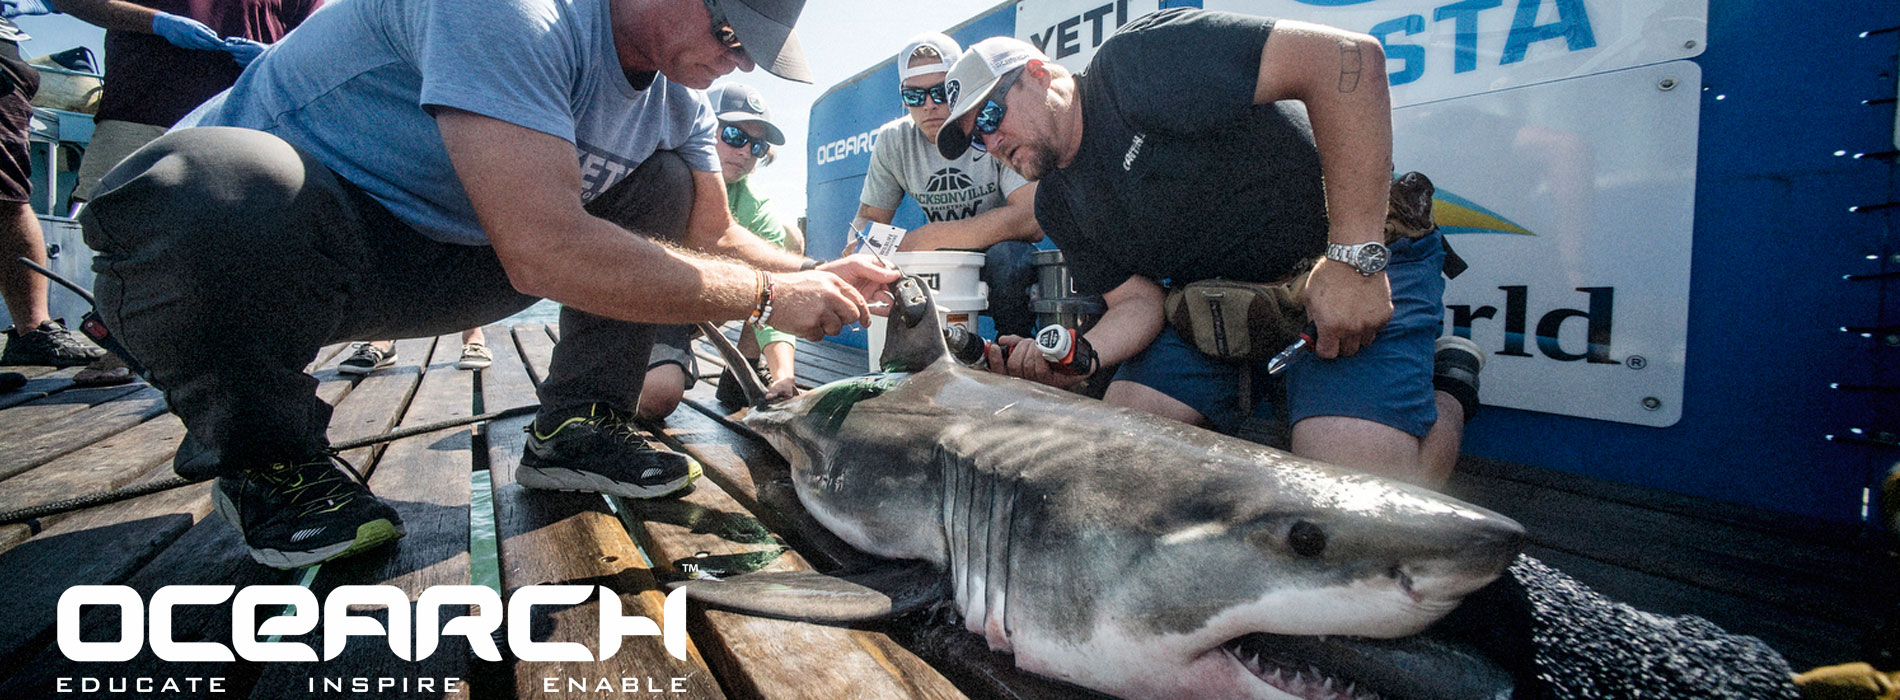 Partnership between SeaWorld and OCEARCH